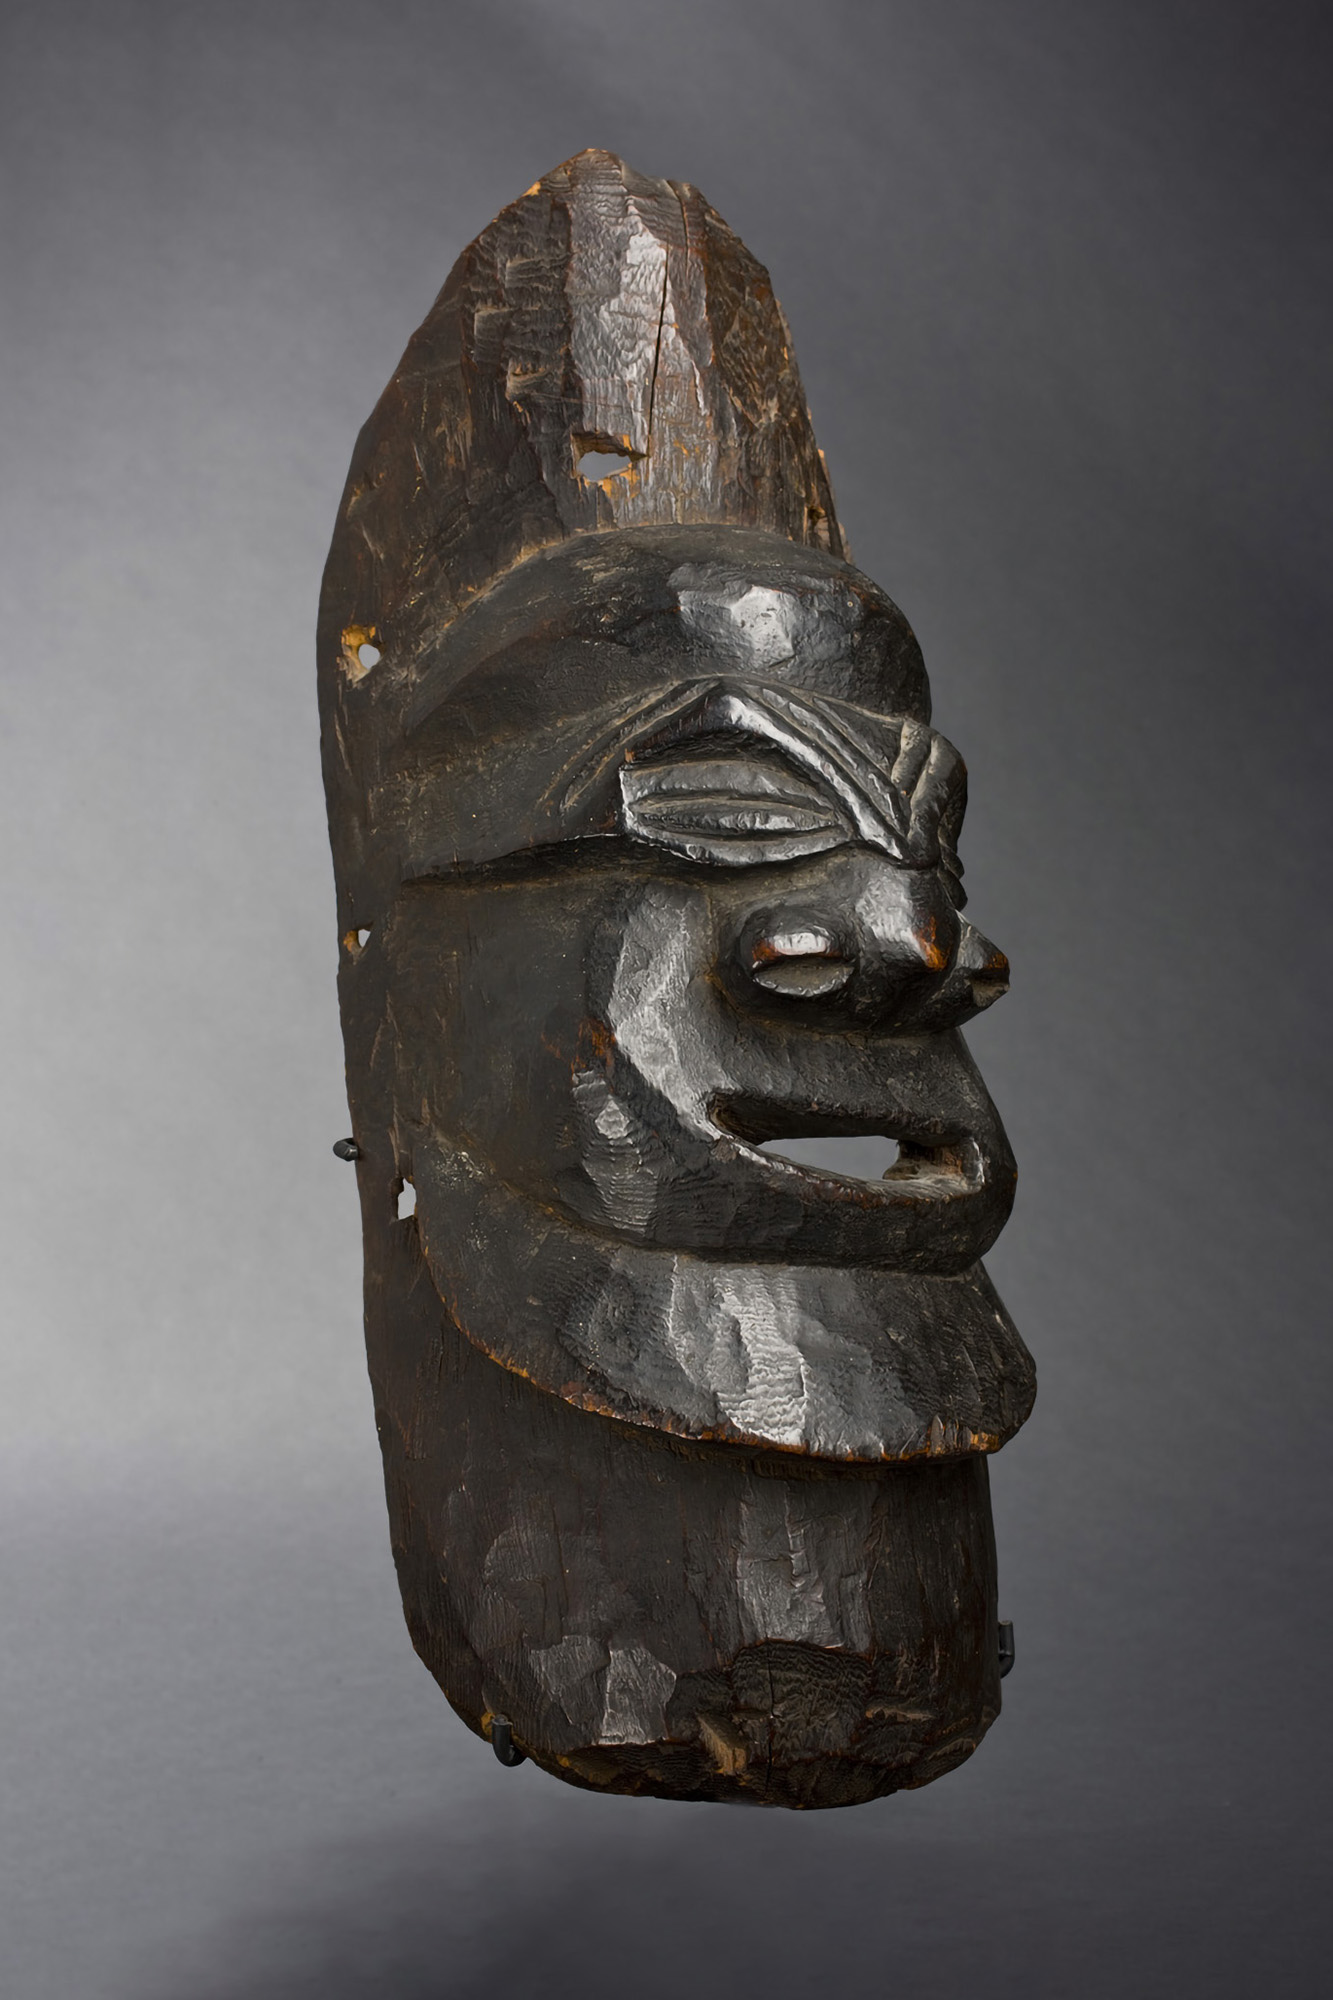 An Important Old Kanak Mask, New Caledonia 18th – 19th Century